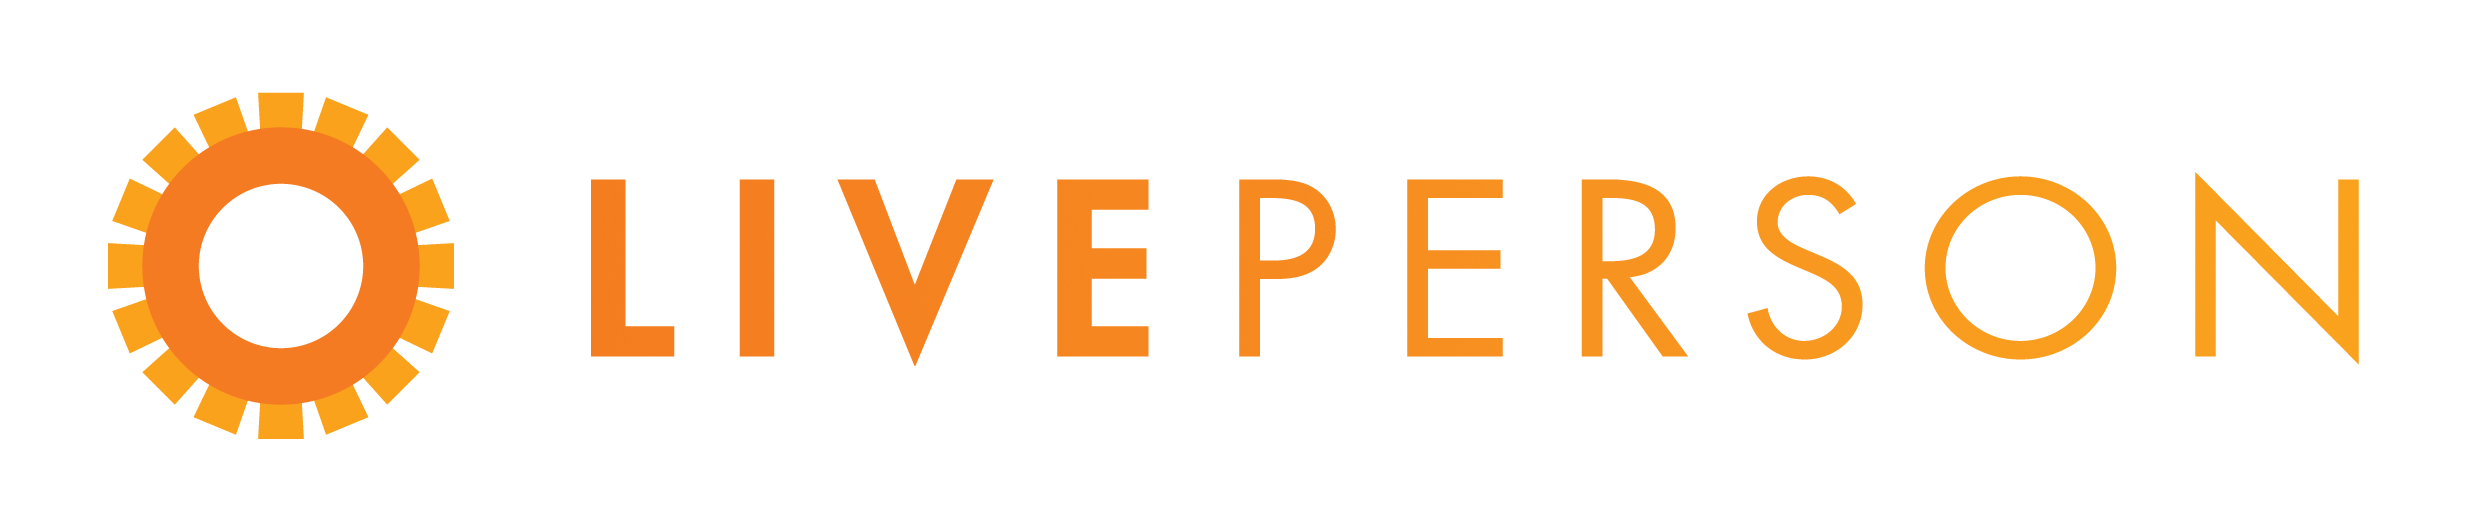 LivePerson_logo.png